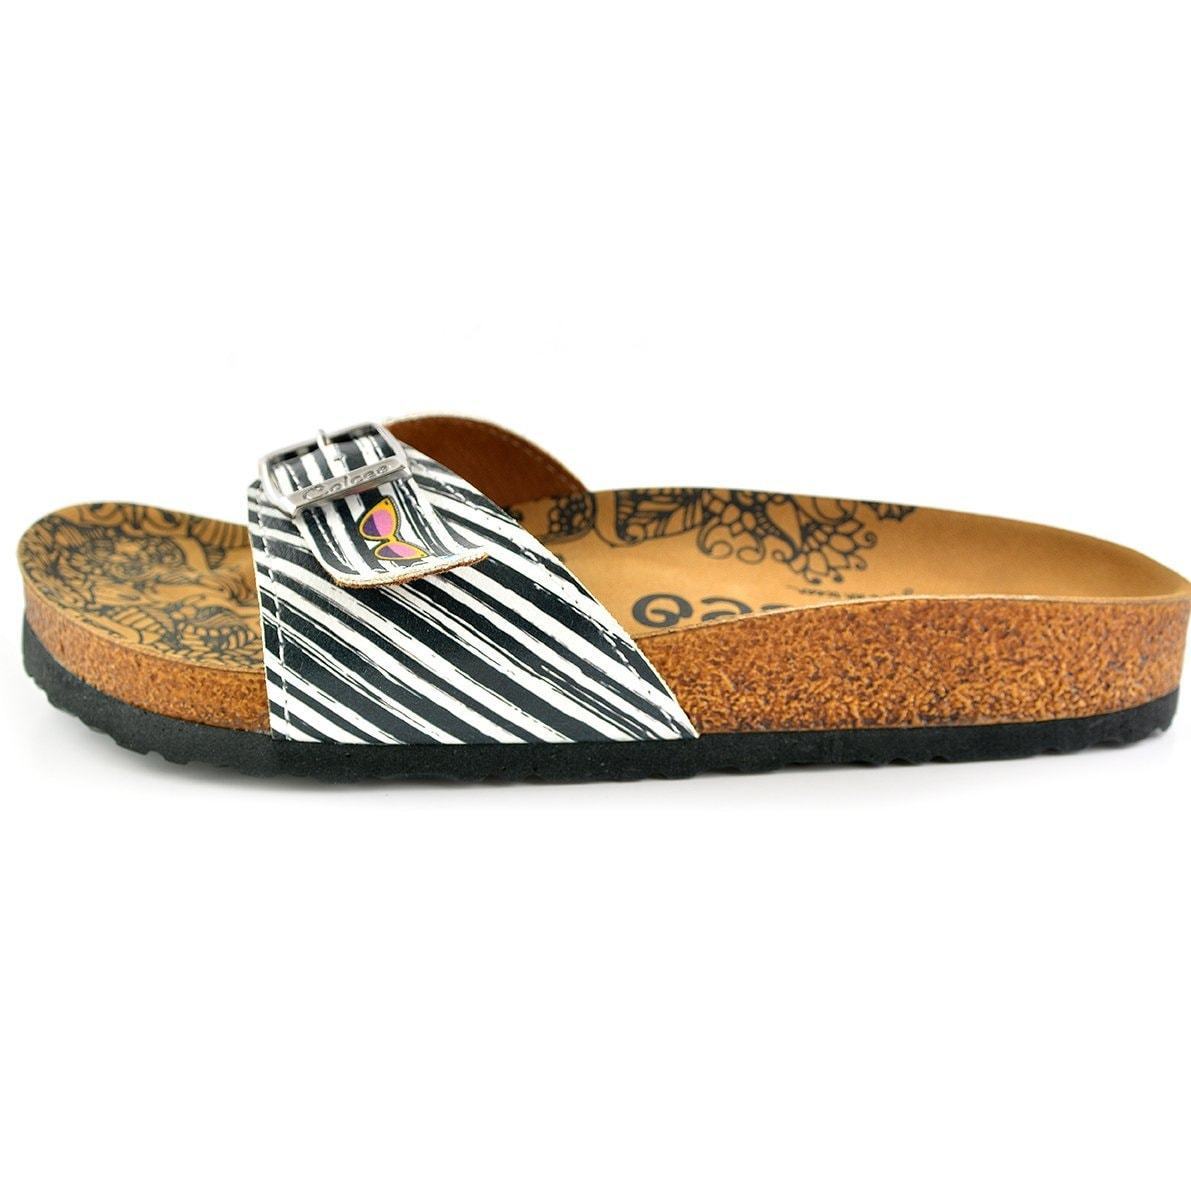 Black & White Lips Buckle-Accent Sandal CAL902 (737679114336)